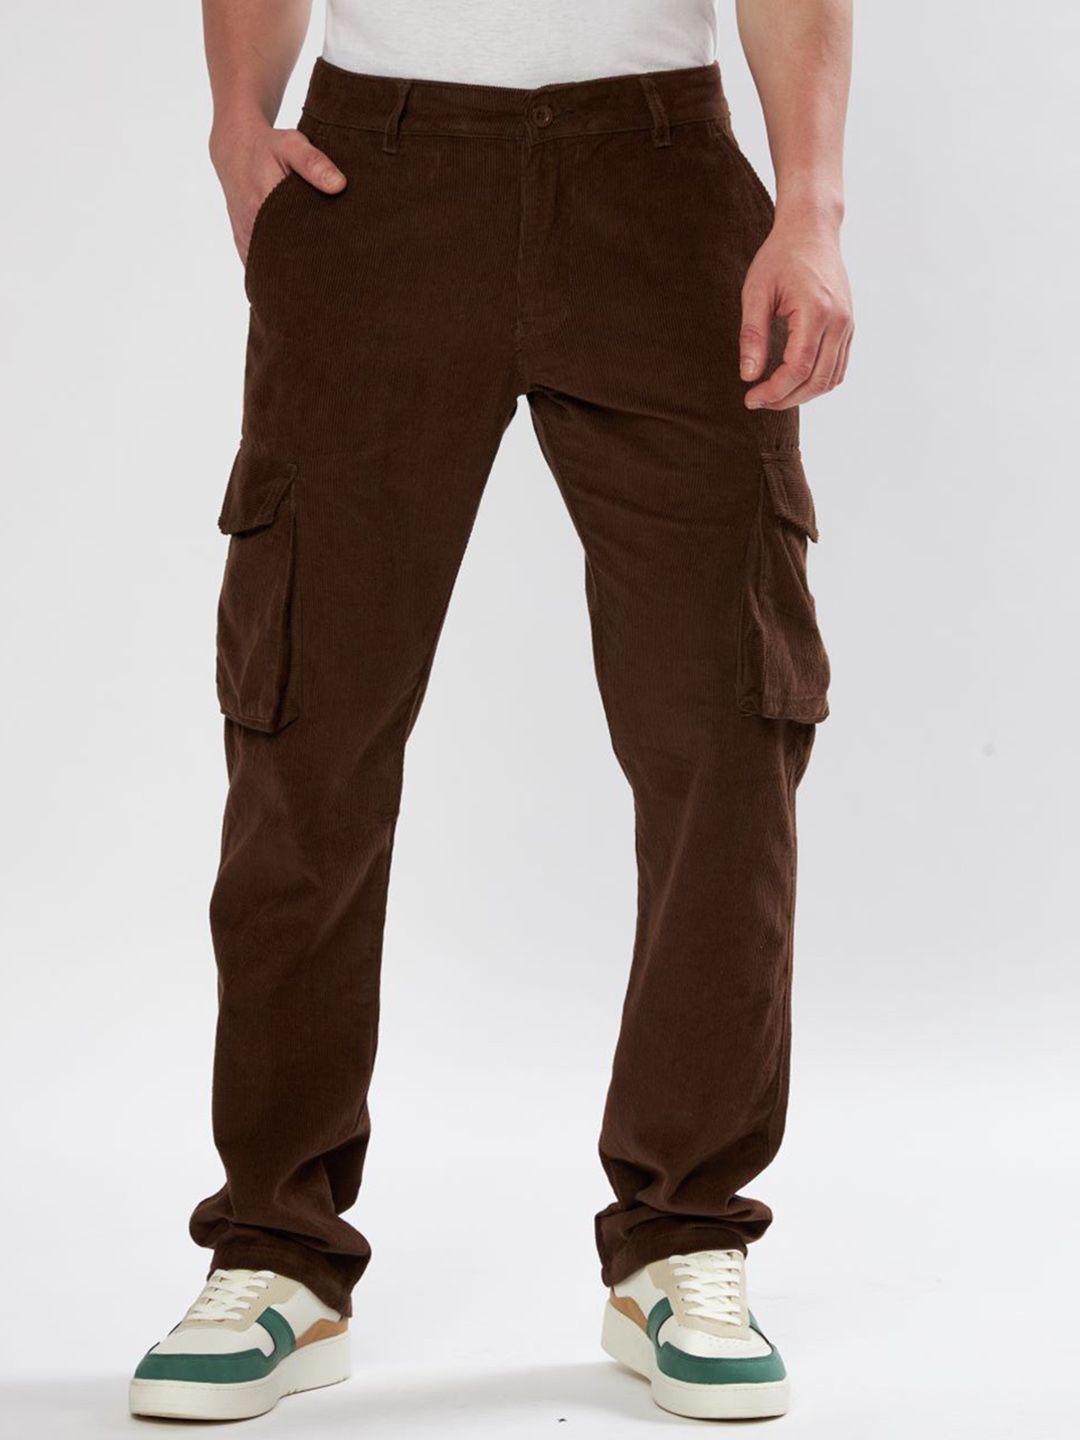 united-denim-men-relaxed-fit-corduroy-cargo-trousers